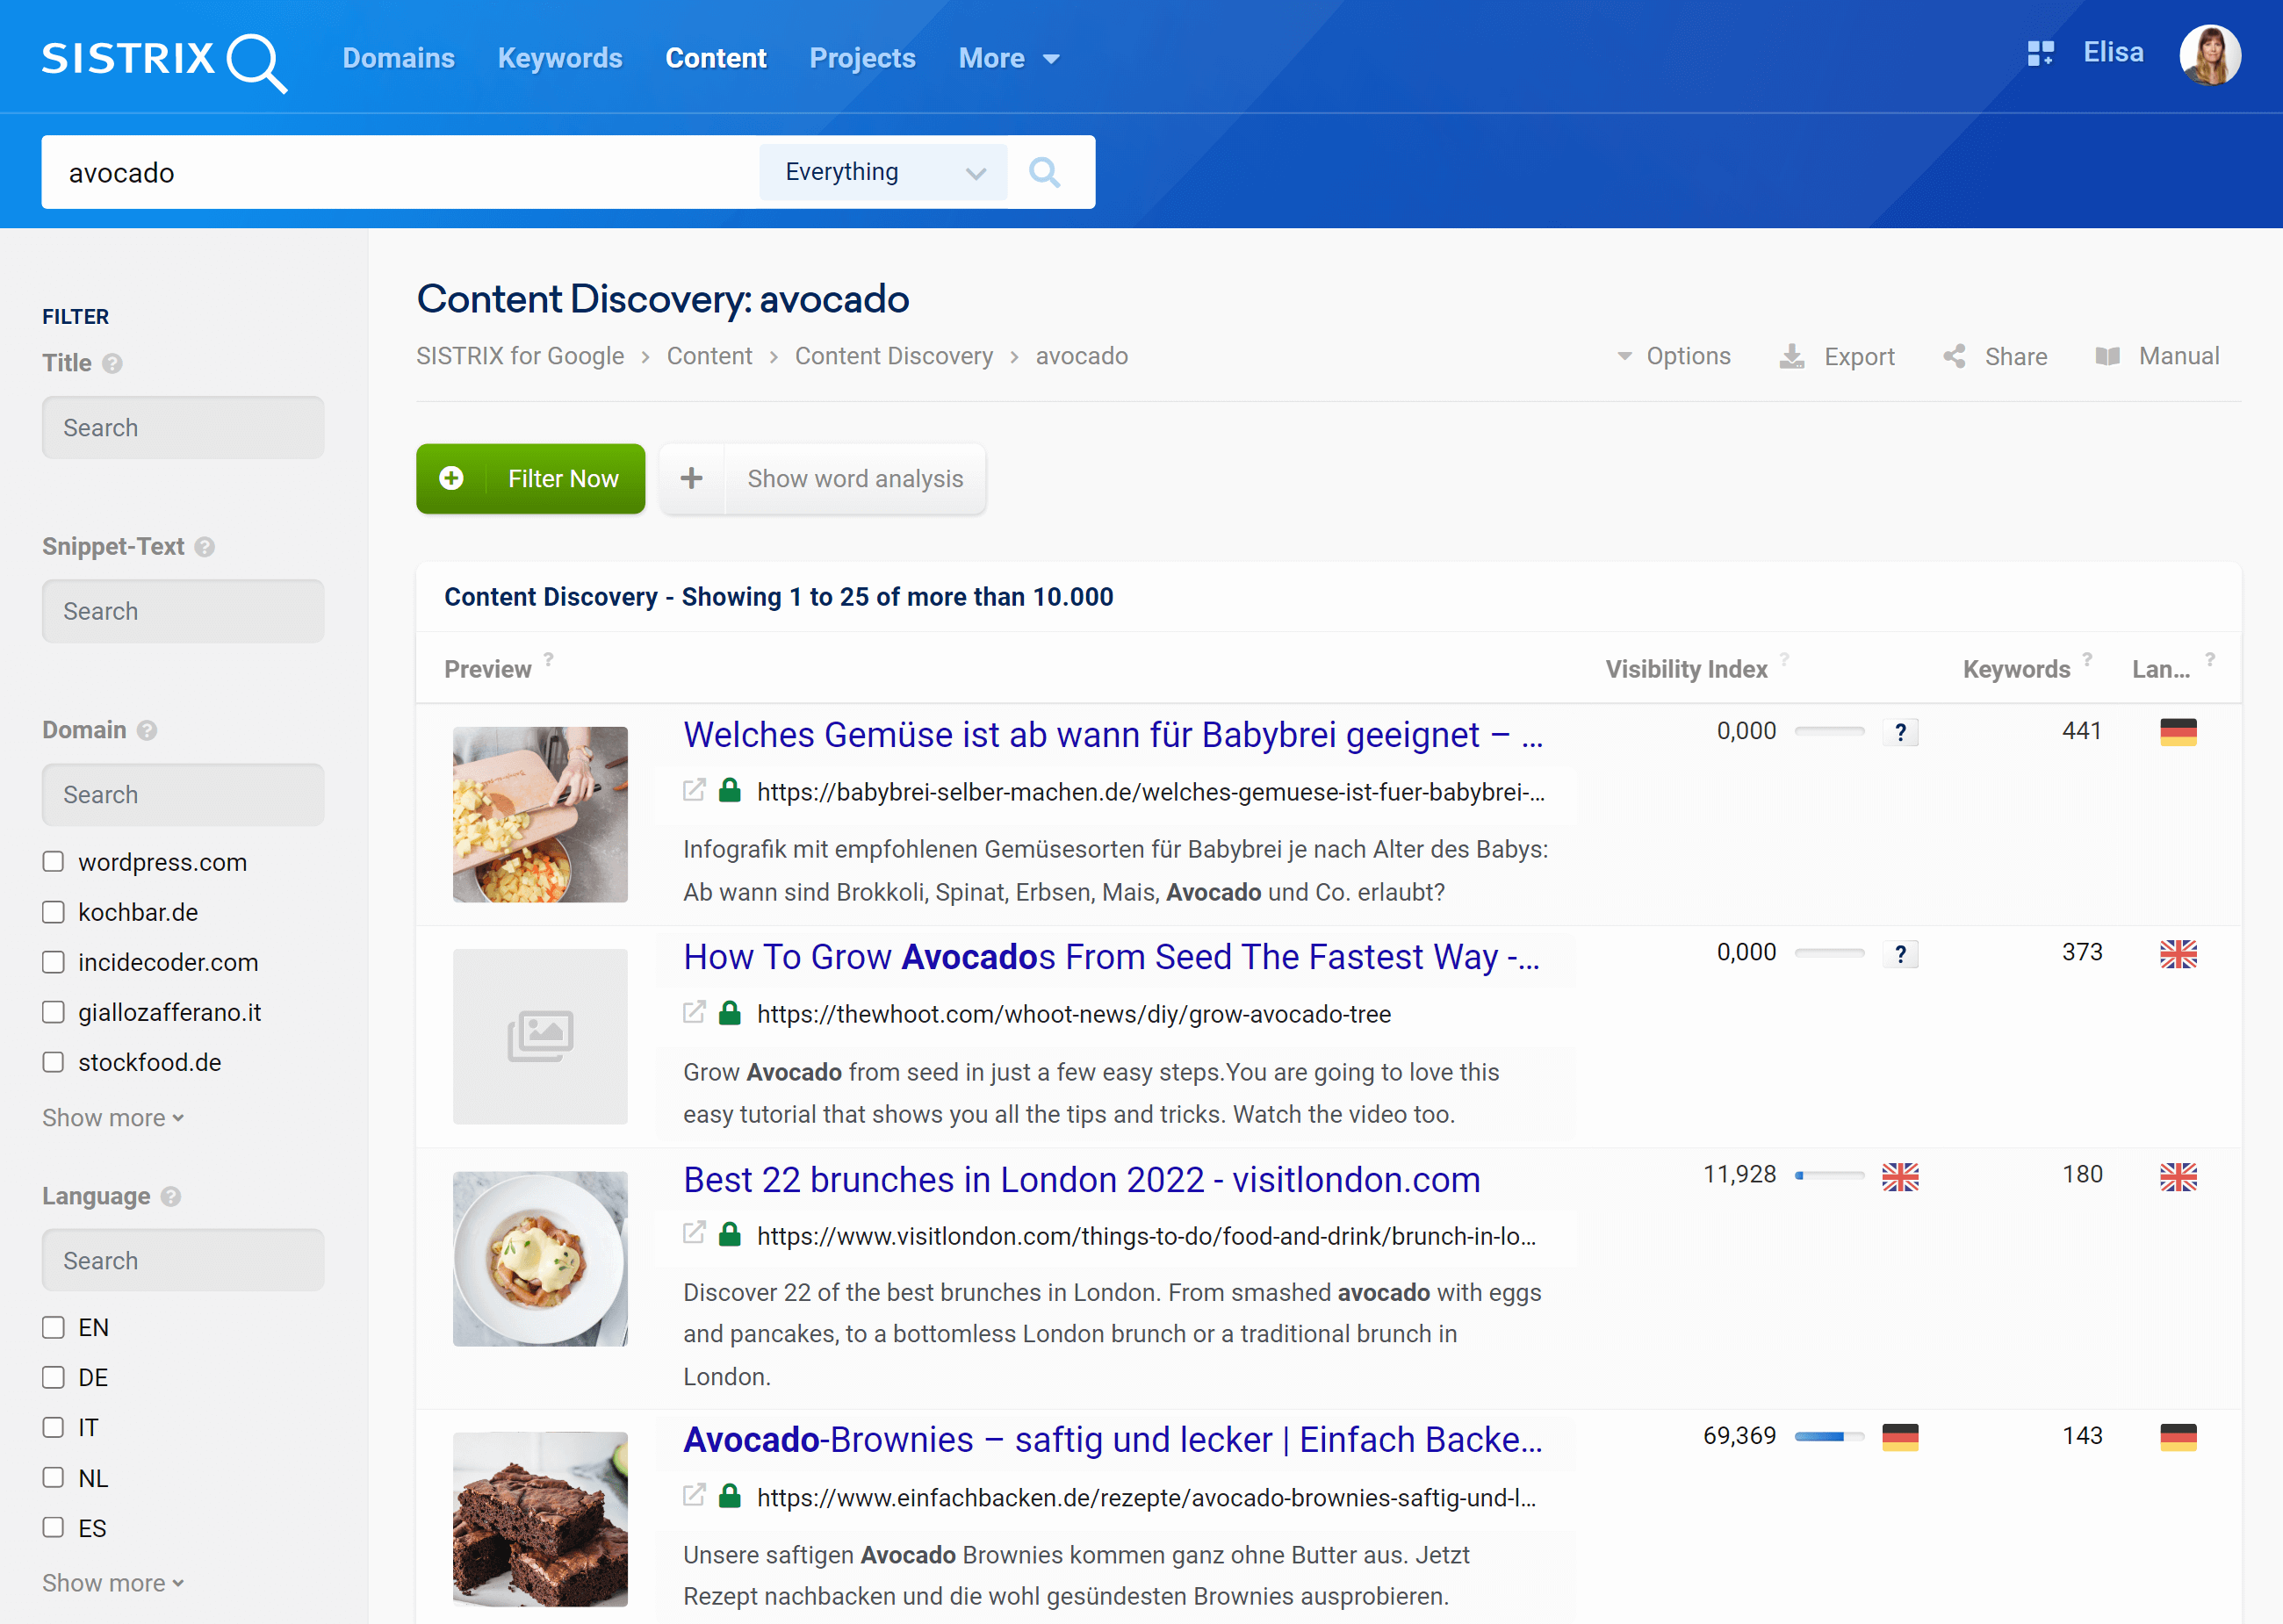 The interface of the Content Discovery tool